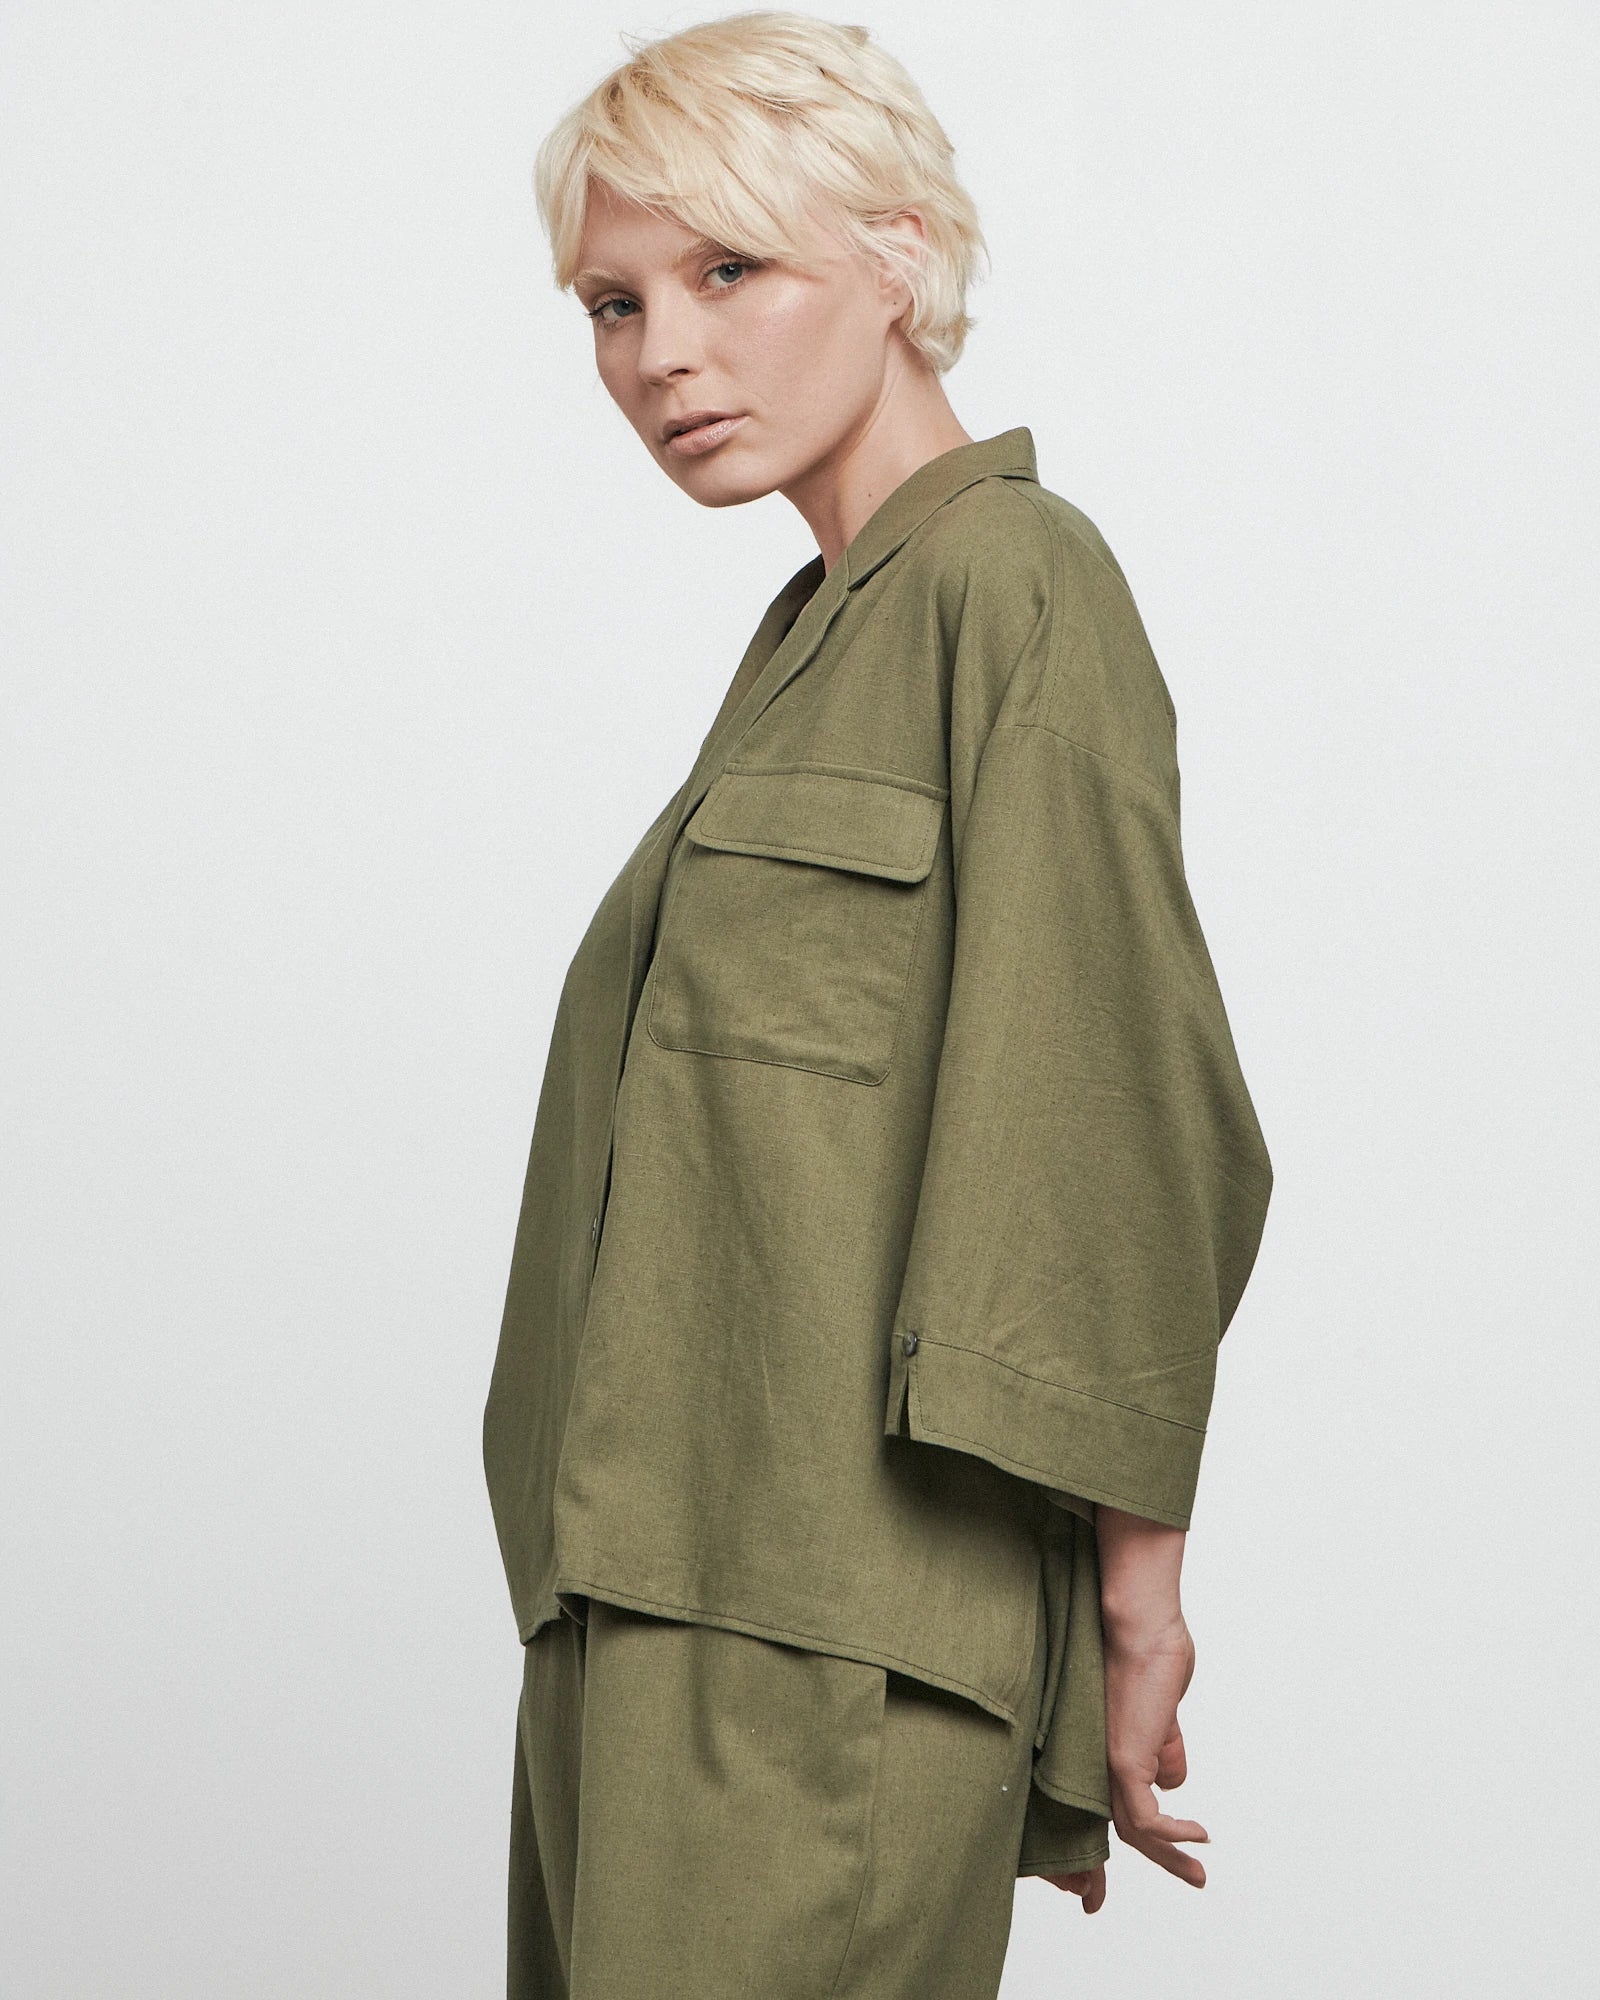 The Casual Shirt - OLIVE